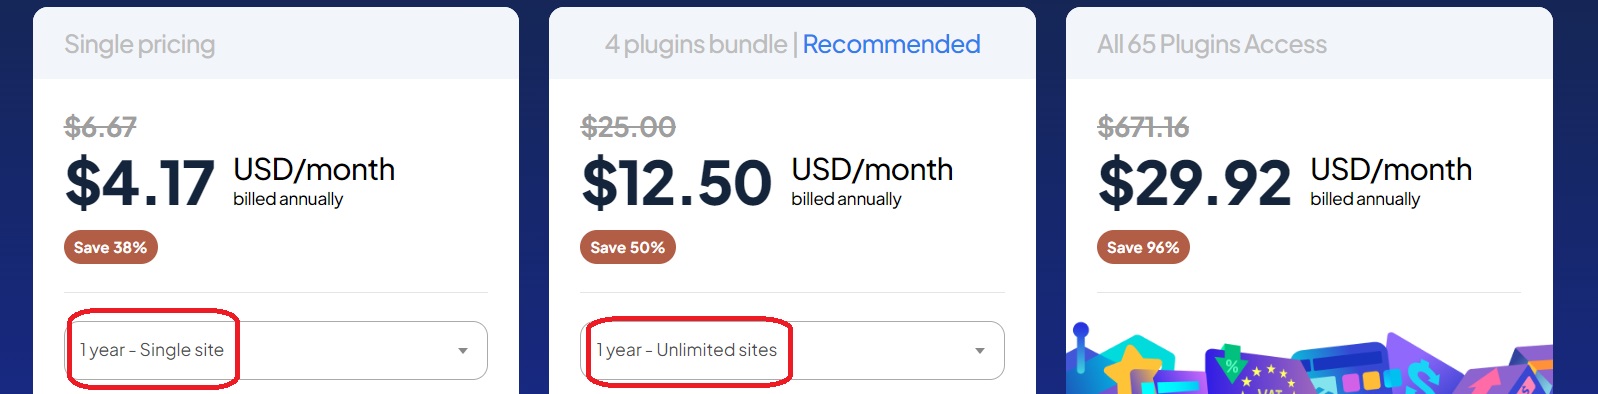 Unlimited Sites